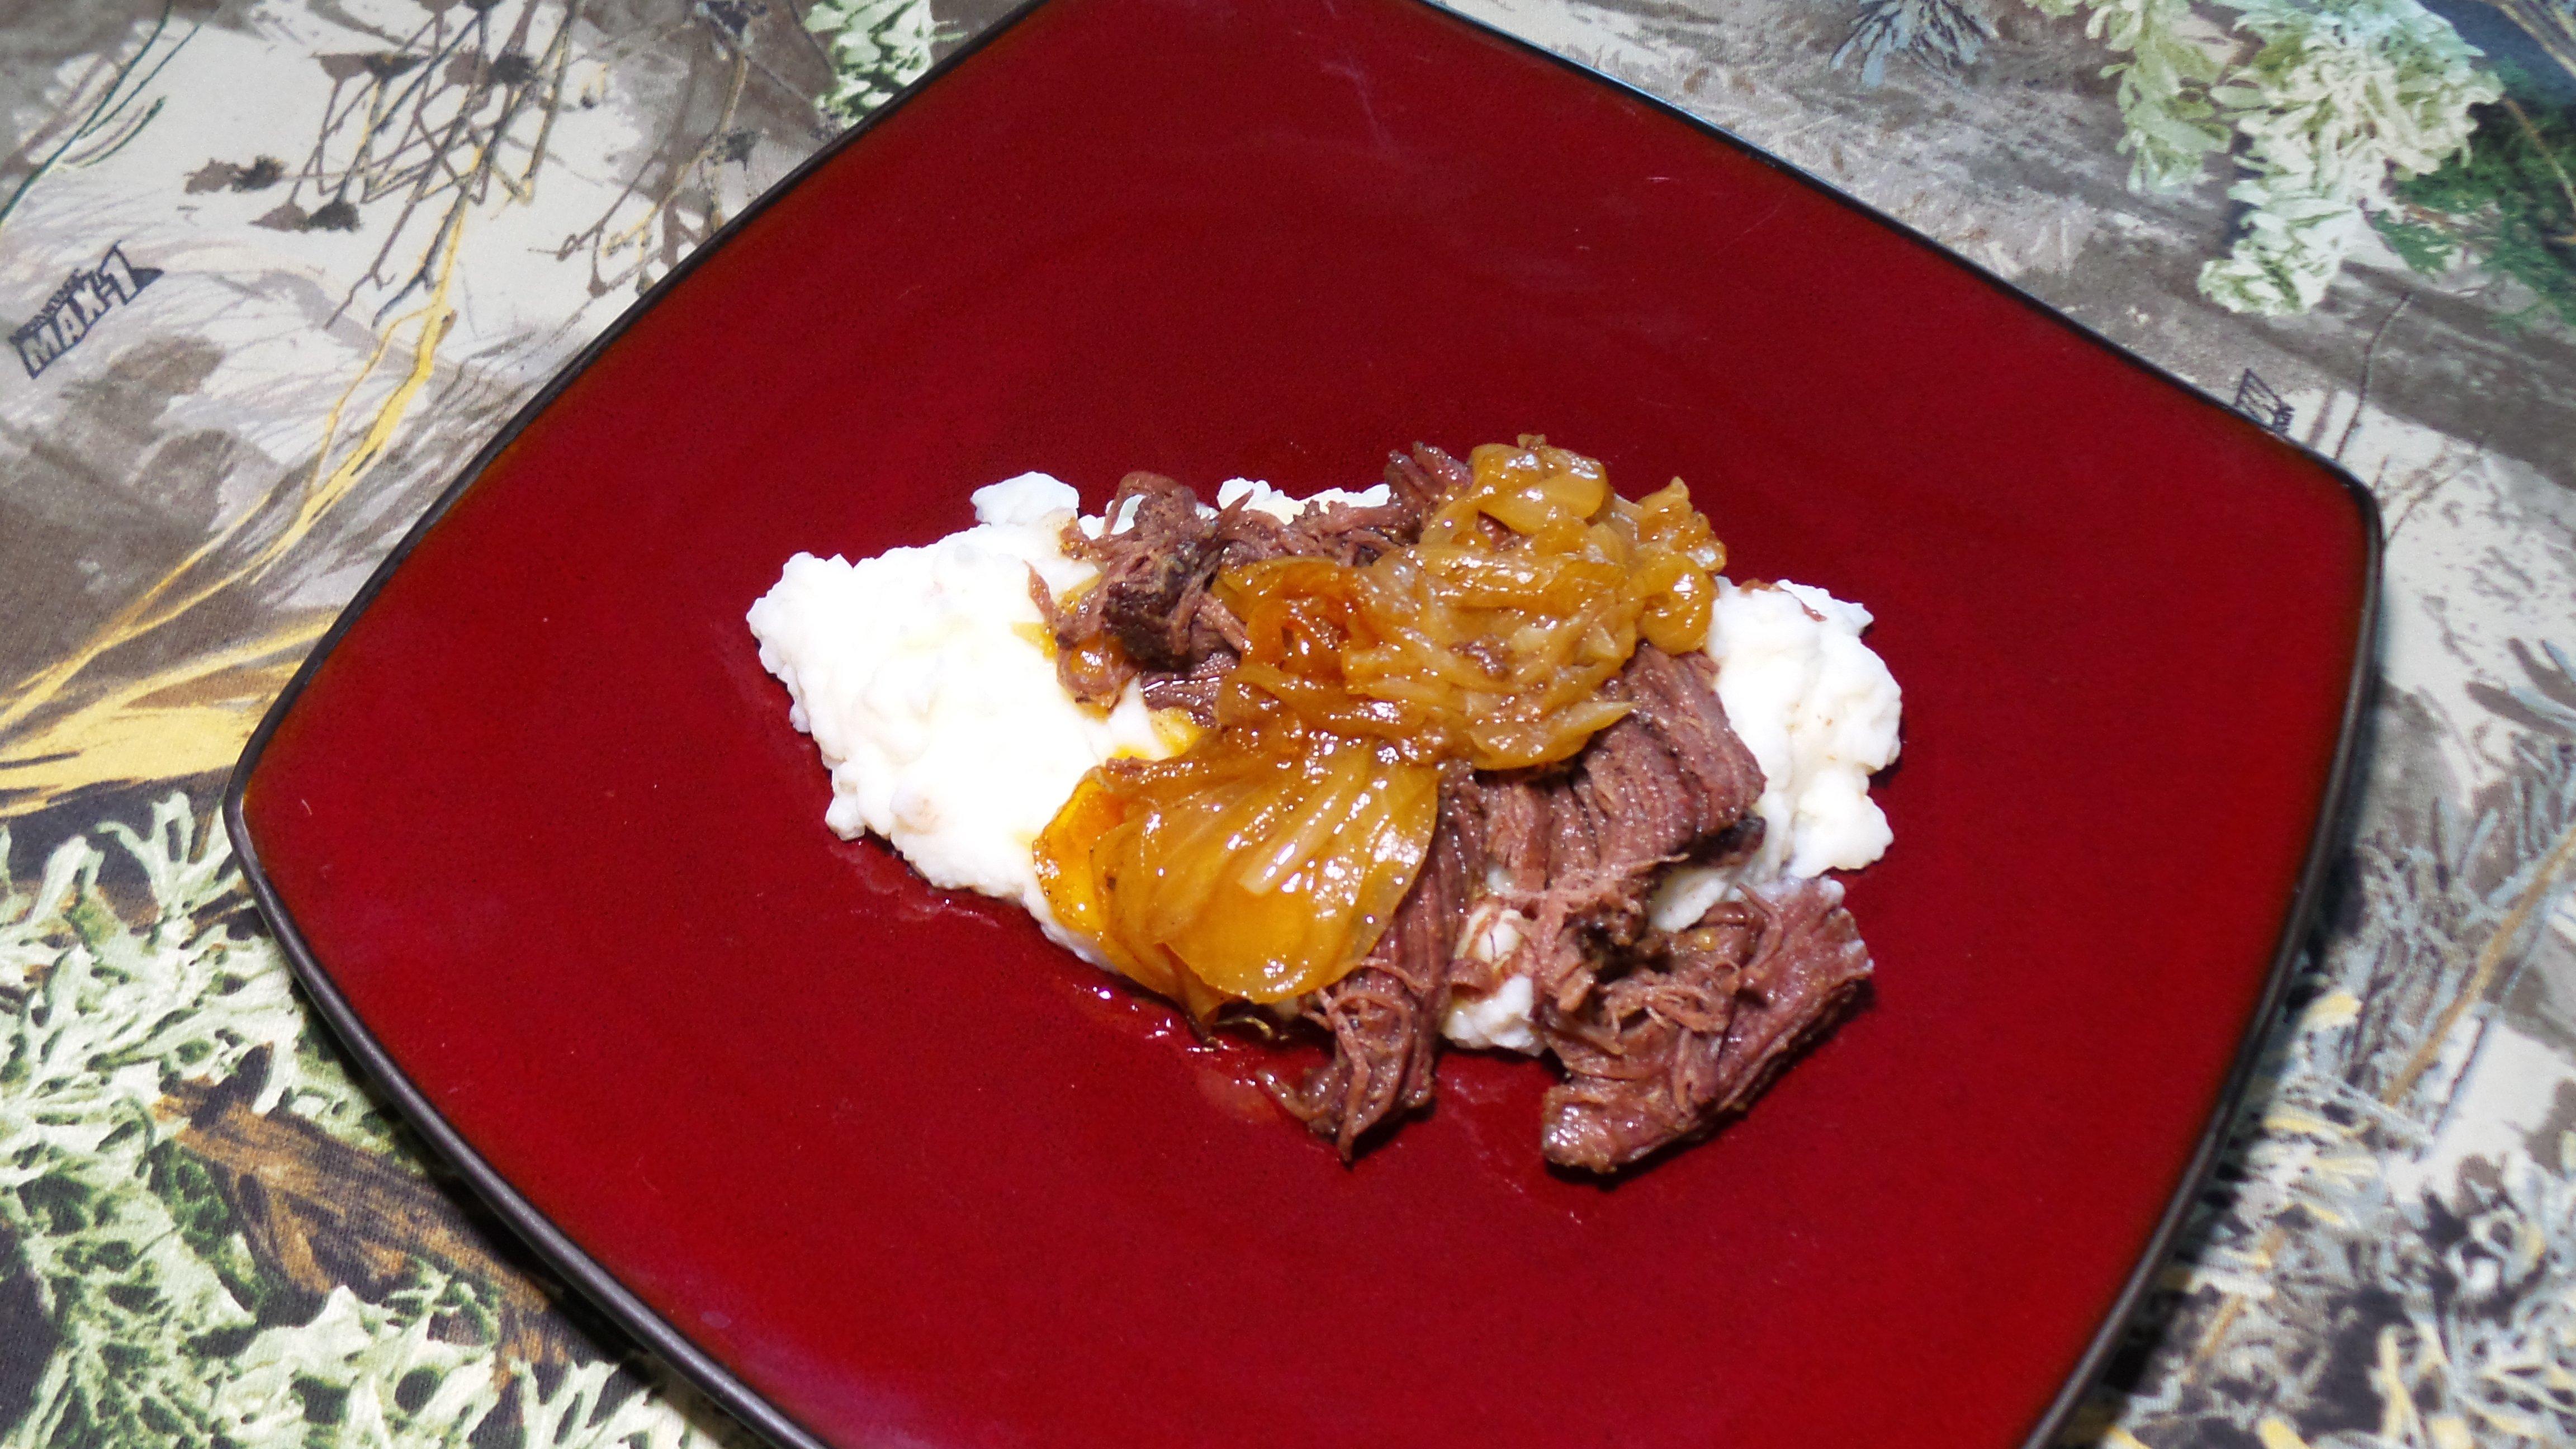 Beer braised elk and onions over mashed potatoes.